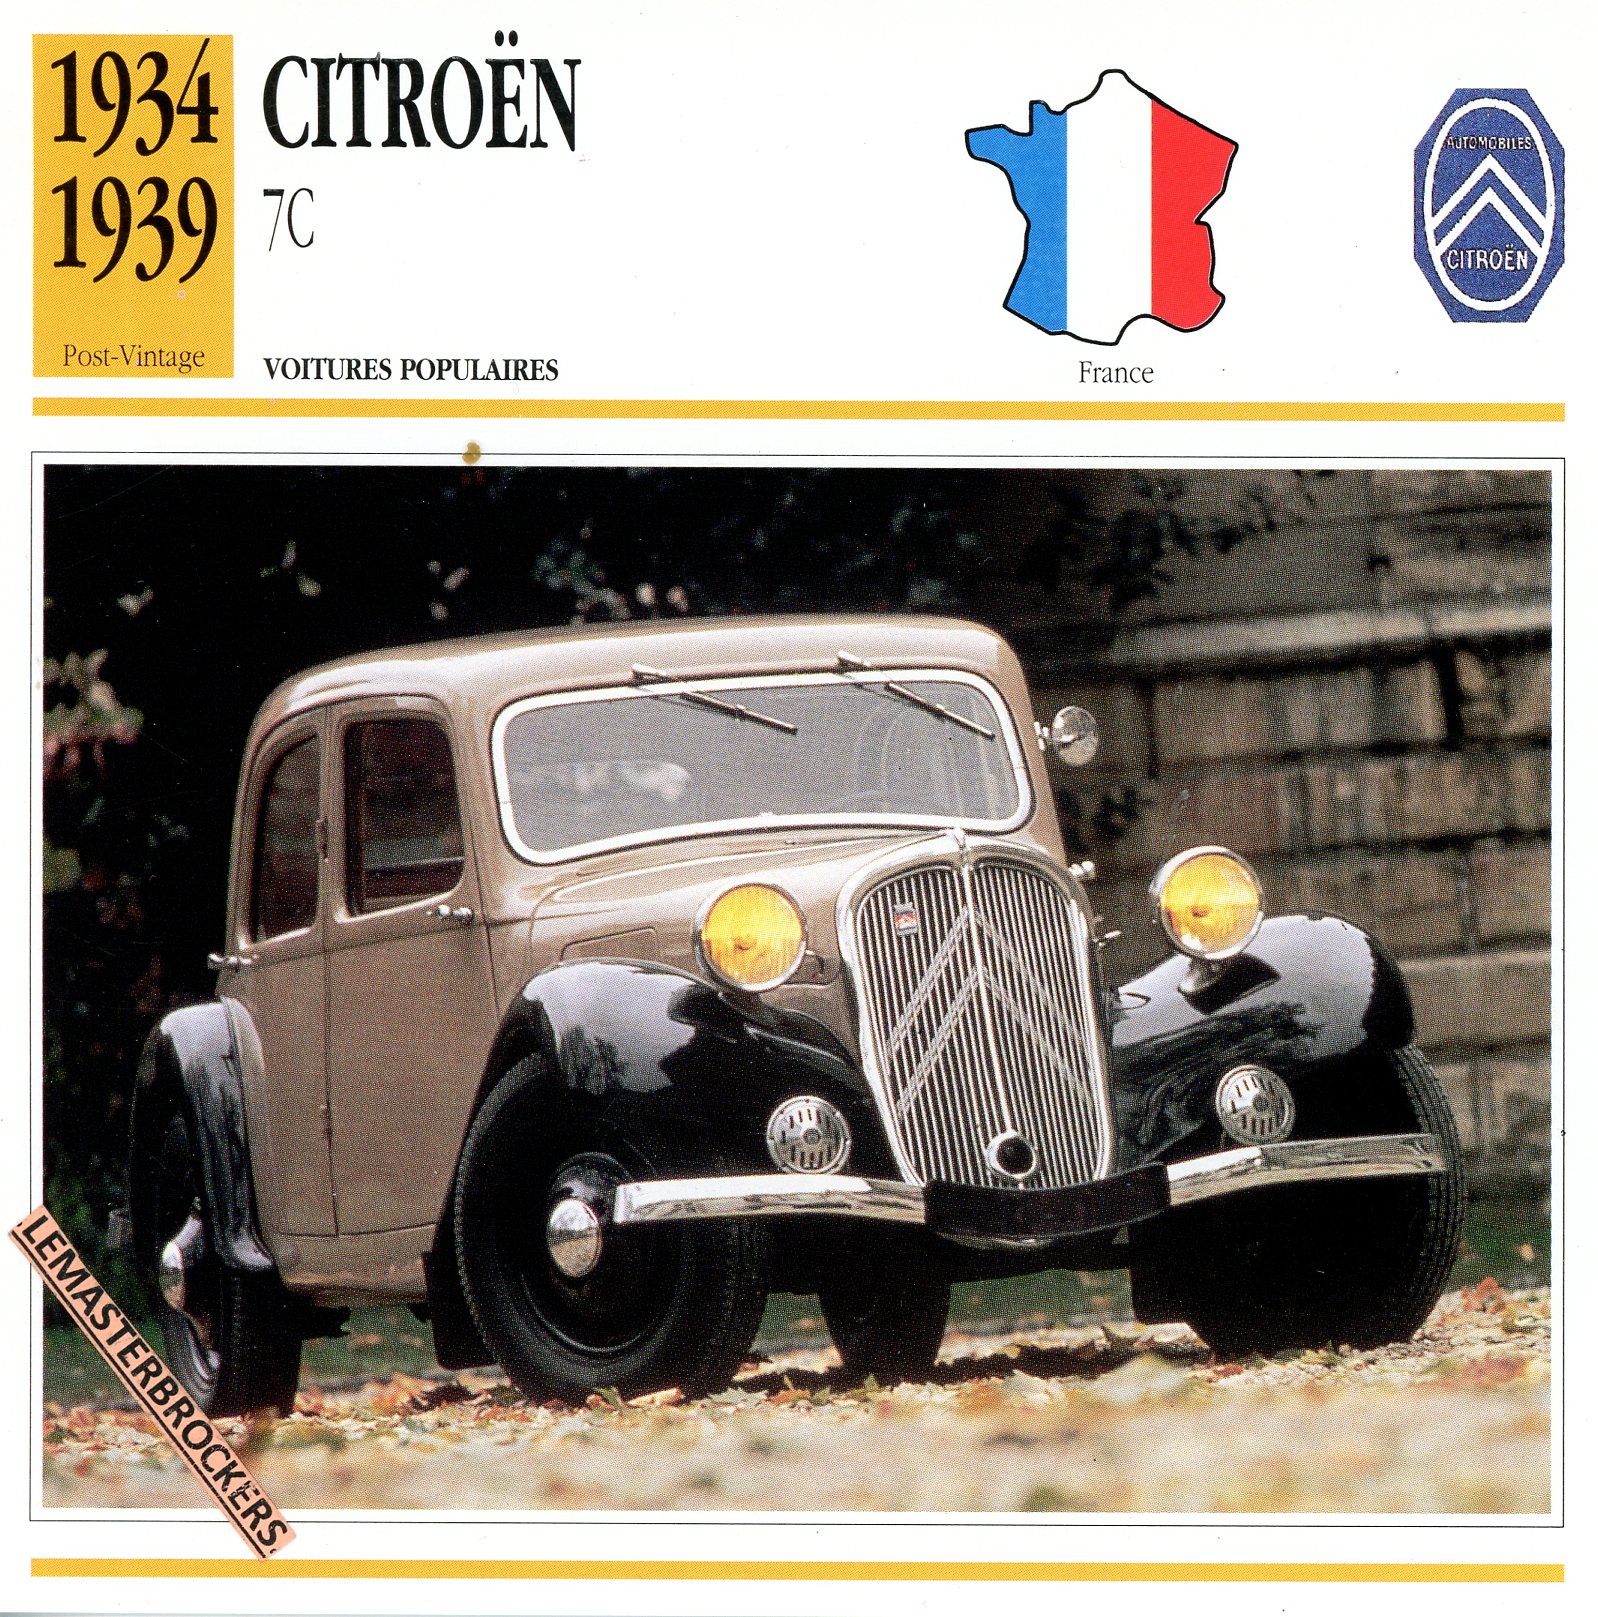 FICHE-CITROËN-TRACTION-7C-1934-CARD-CARS-LEMASTERBROCKERS